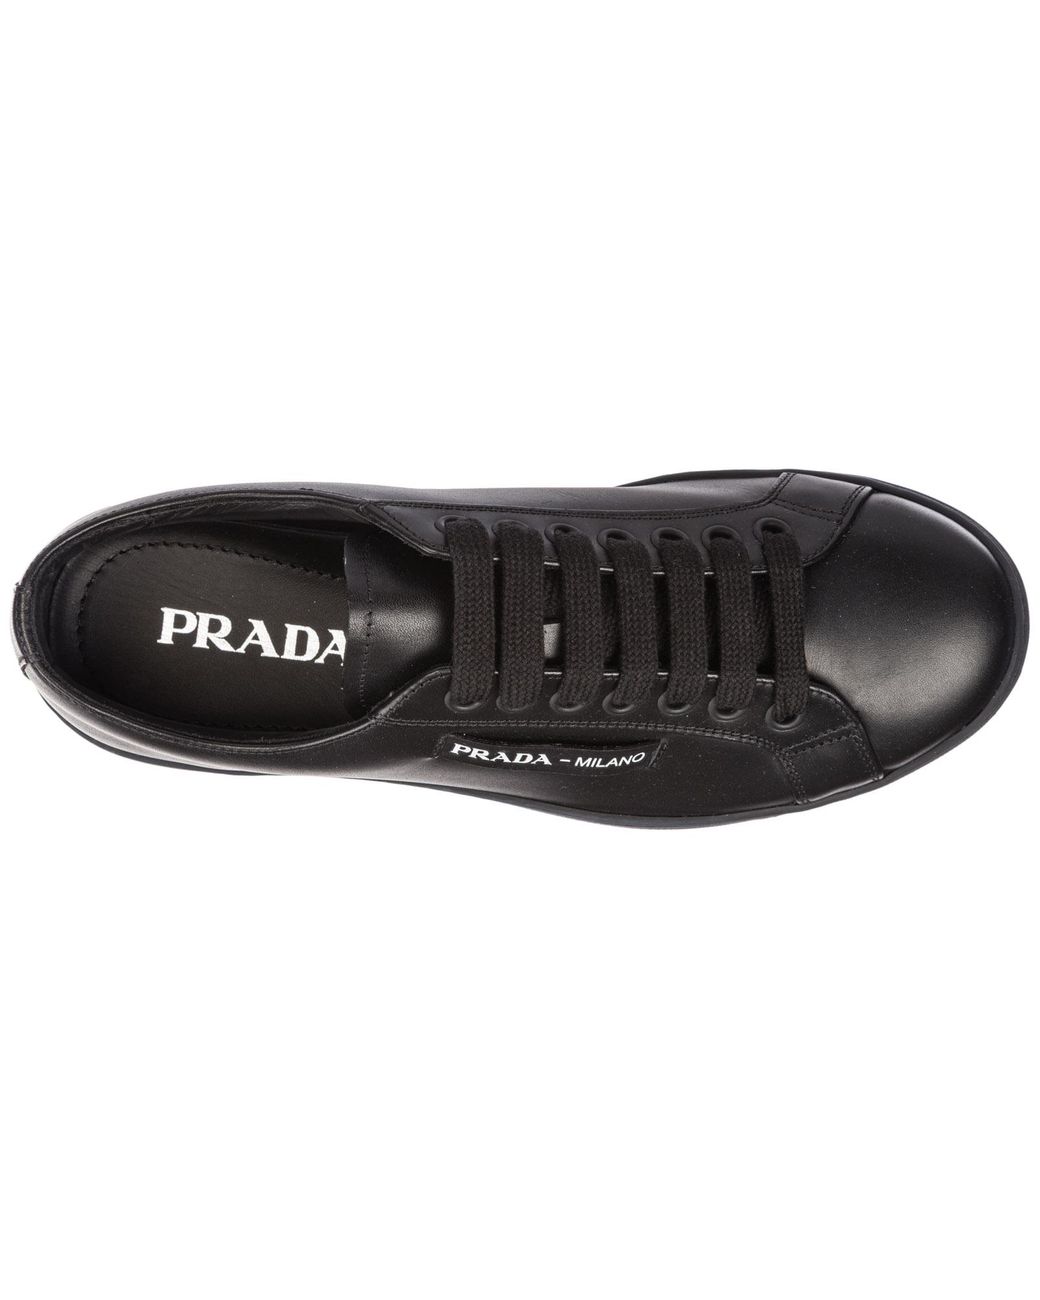 Prada Shoes Leather Trainers Sneakers in Nero (Black) for Men - Lyst